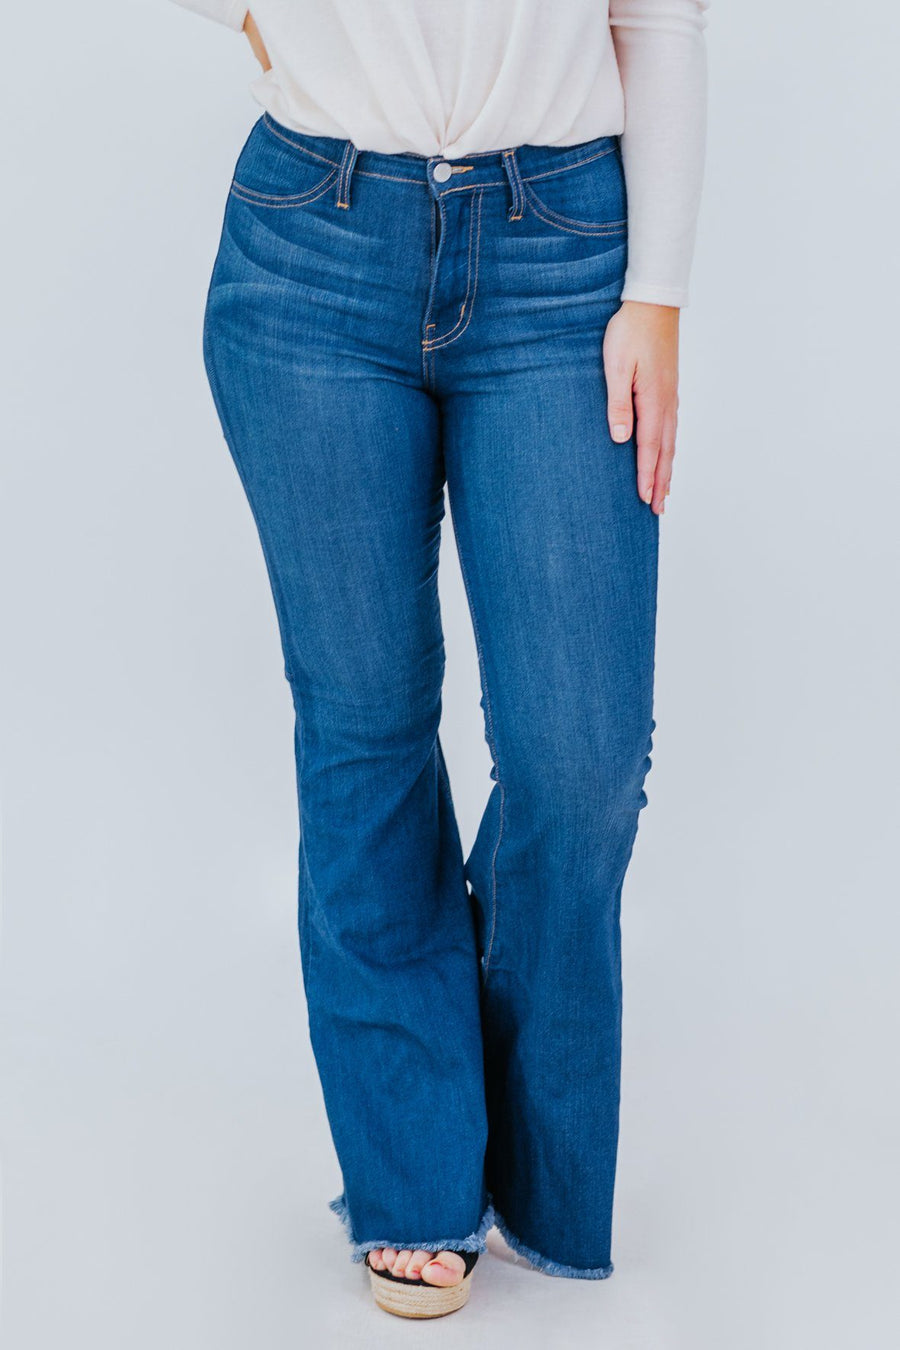 judy blue flare jeans